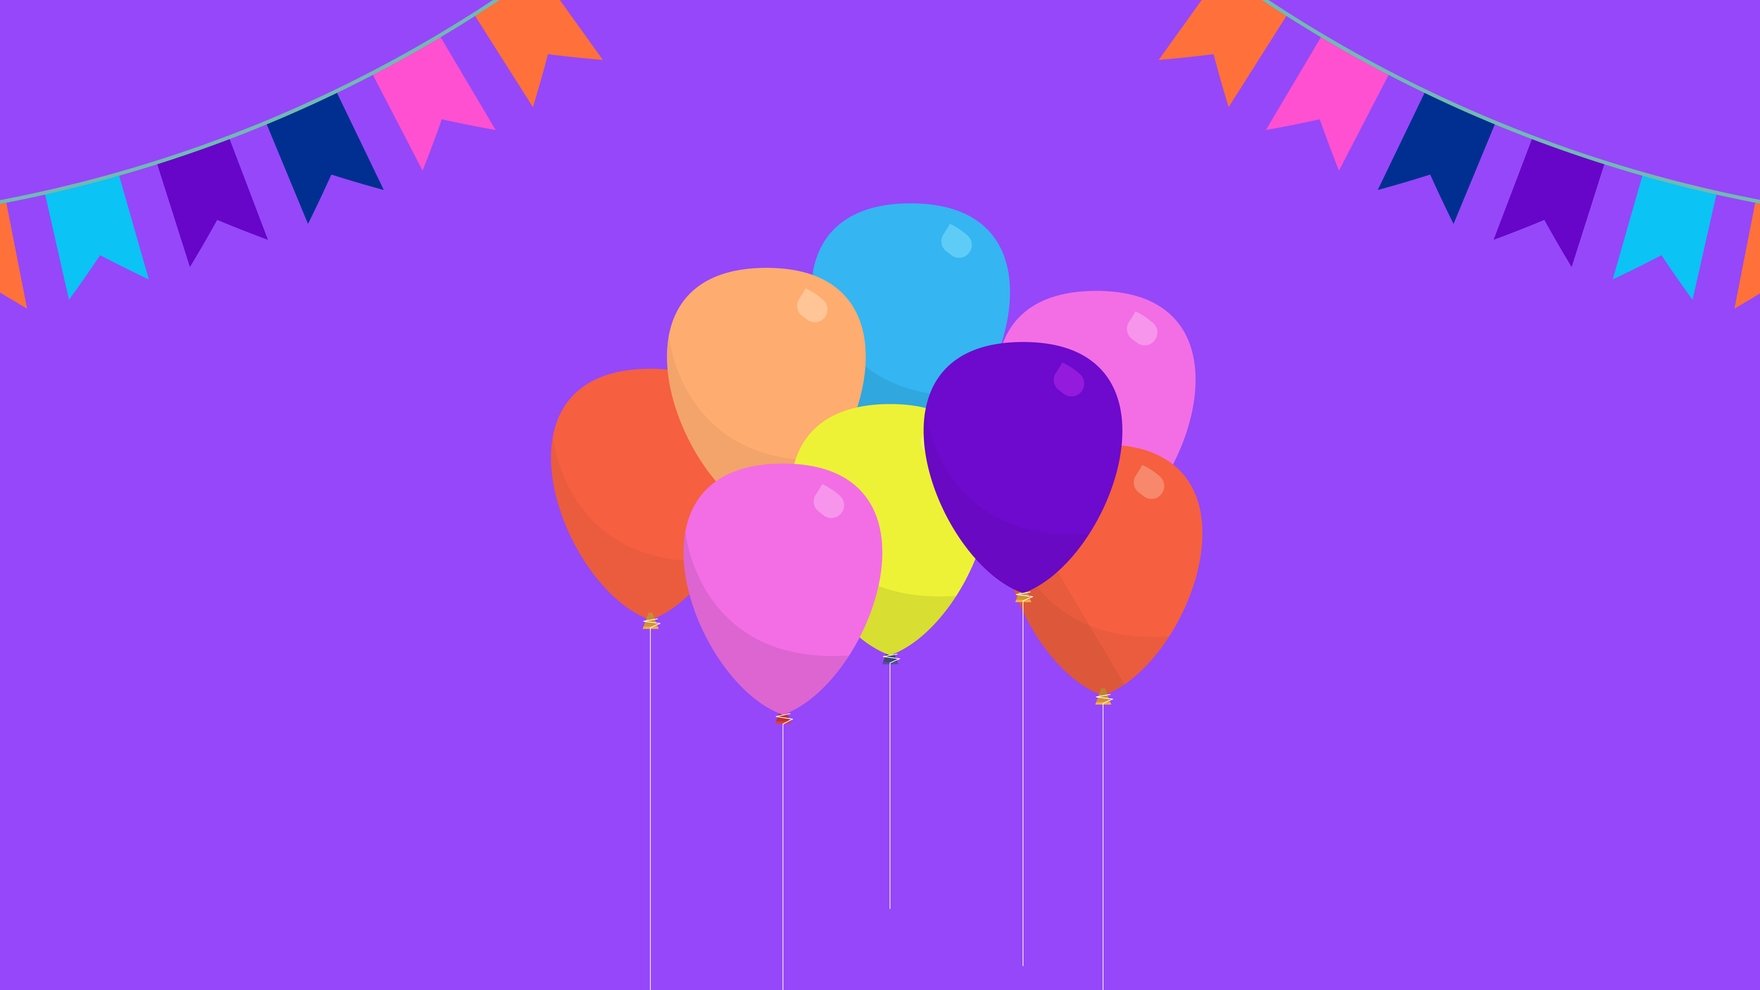 Birthday Party Background in Illustrator, EPS, SVG, JPG, PNG